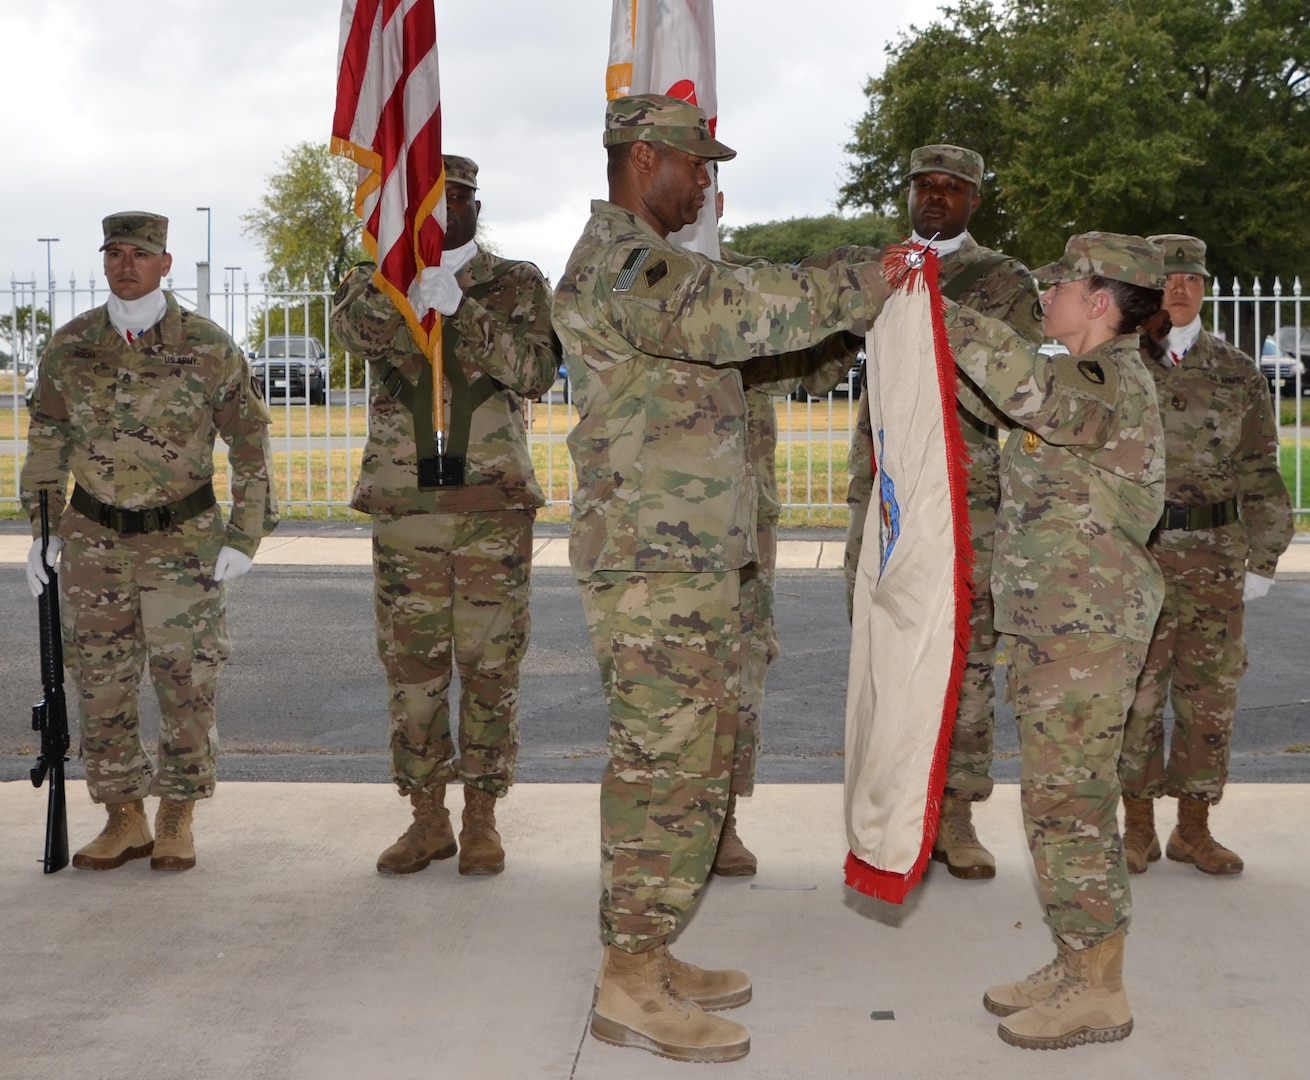 Col. Robert McDonald (left) and Command Sgt. Maj. Sol Nevarezberrios unfurl the 410th Contracting Support Brigade colors during an uncasing ceremony Sept. 5 at Joint Base San Antonio-Fort Sam Houston following the unit’s return from a nine-month deployment to Afghanistan. McDonald is the 410th CSB commander and Nevarezberrios is the brigade command sergeant major.